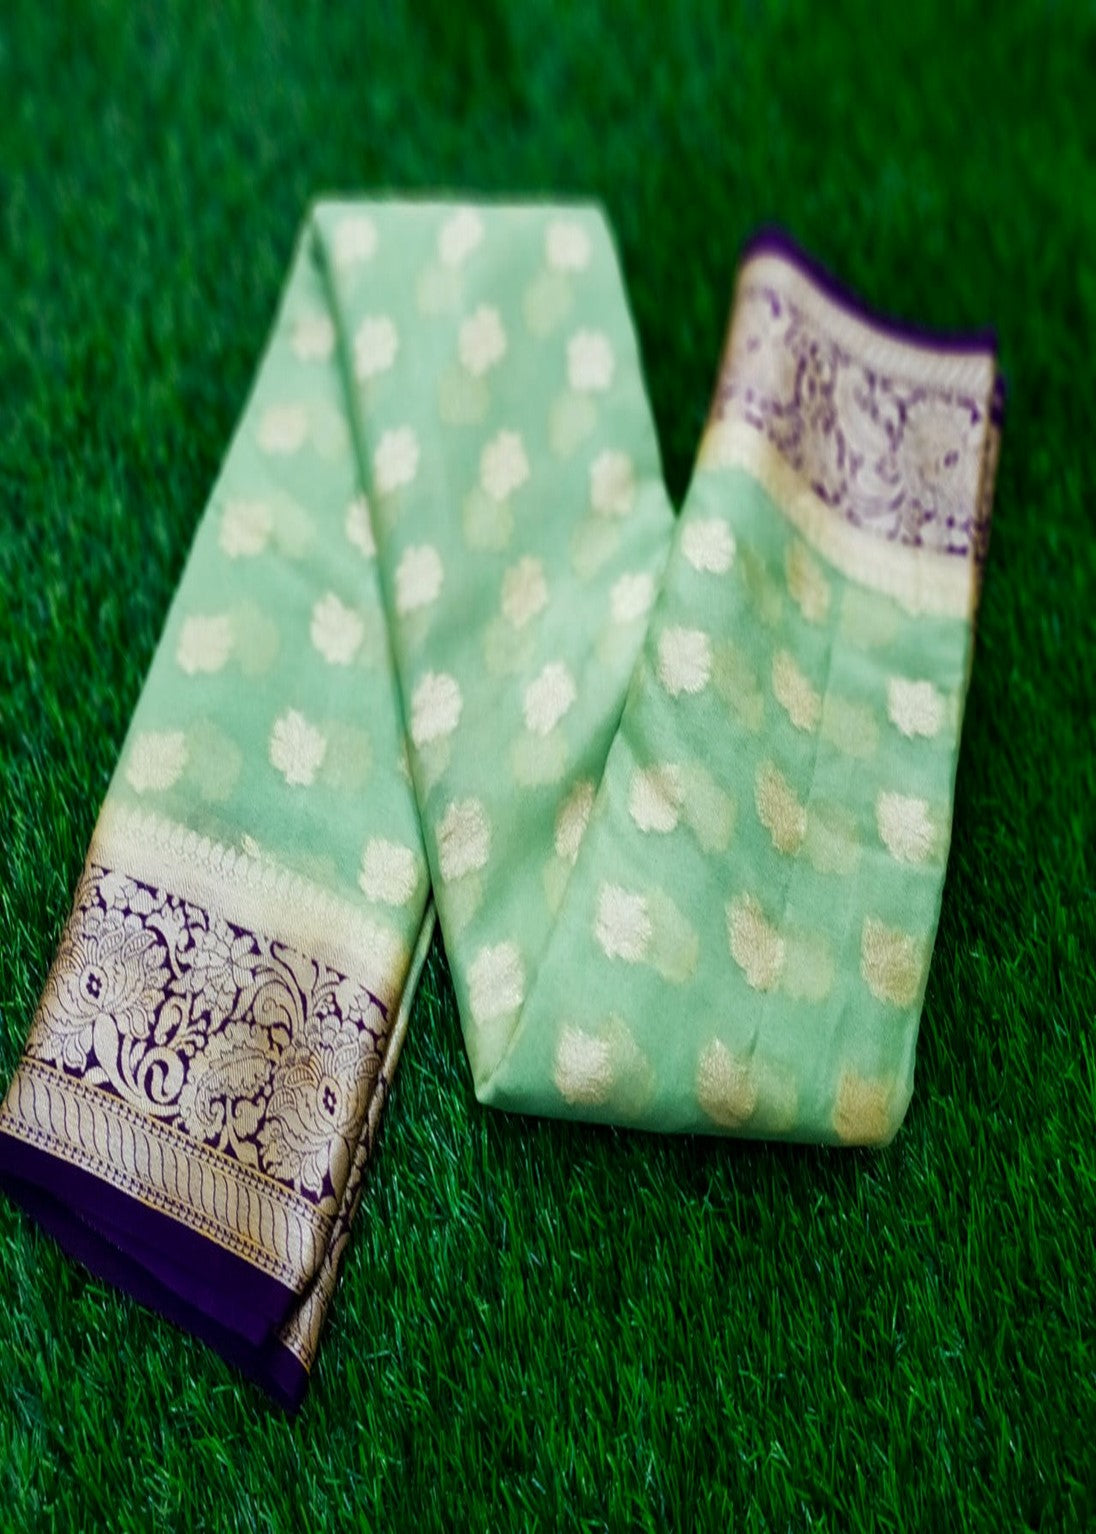 Pure handloom chiffon saree in light green color. Saree has a delicate chiffon zari border with Gorgeous unique Motifs near pallu. The entire saree is beautiful with buti design. It is an elegant traditional Banarasi saree. Irresistible wedding collection. This Mesmerising Saree is a Combination of Elegance and Style.